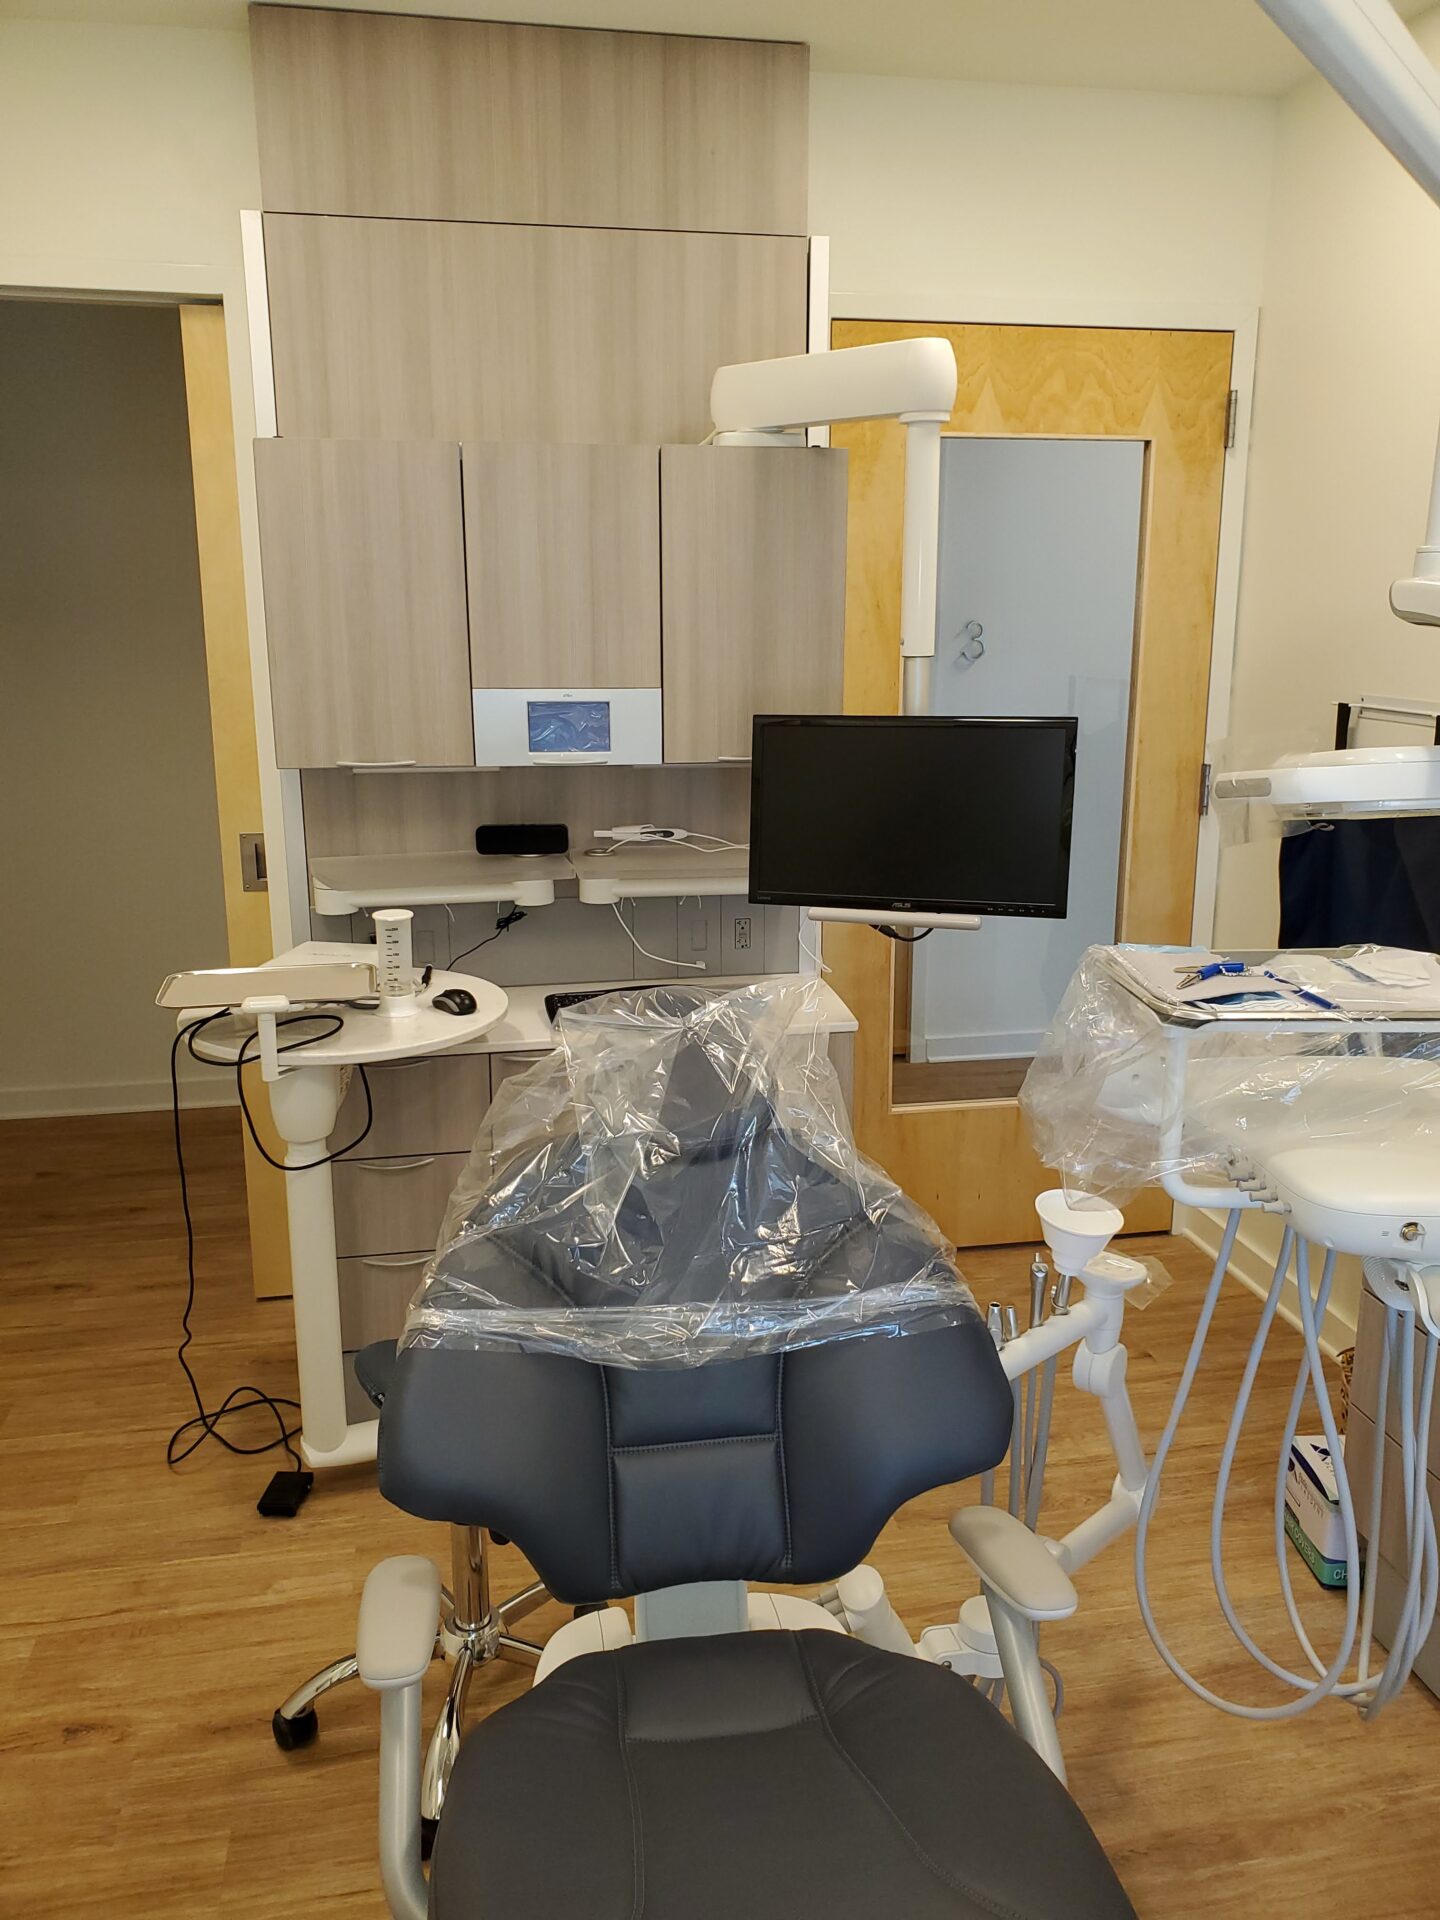 A Dentist Working Room With Every Equipment